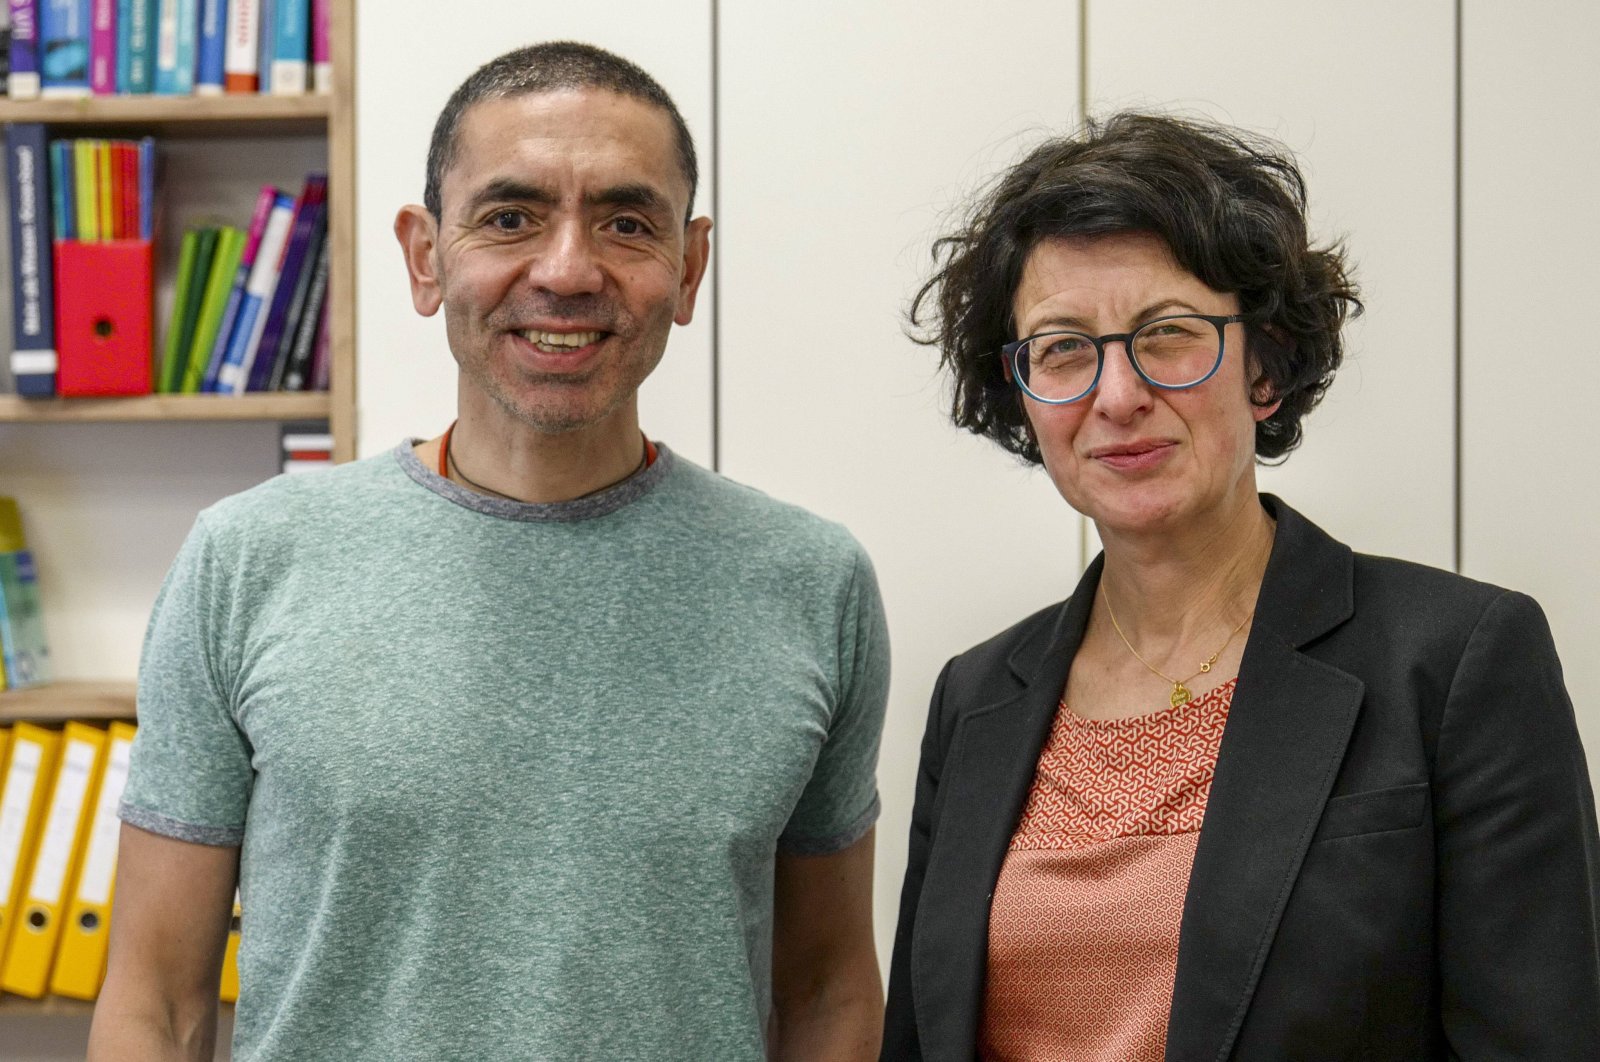 Uğur Şahin (L) is a scientist with more than 60 independent patents in a variety of fields, including life science and biotechnology. Dr. Özlem Türeci is a physician with over 20 years of cancer research experience. (Reuters Photo)